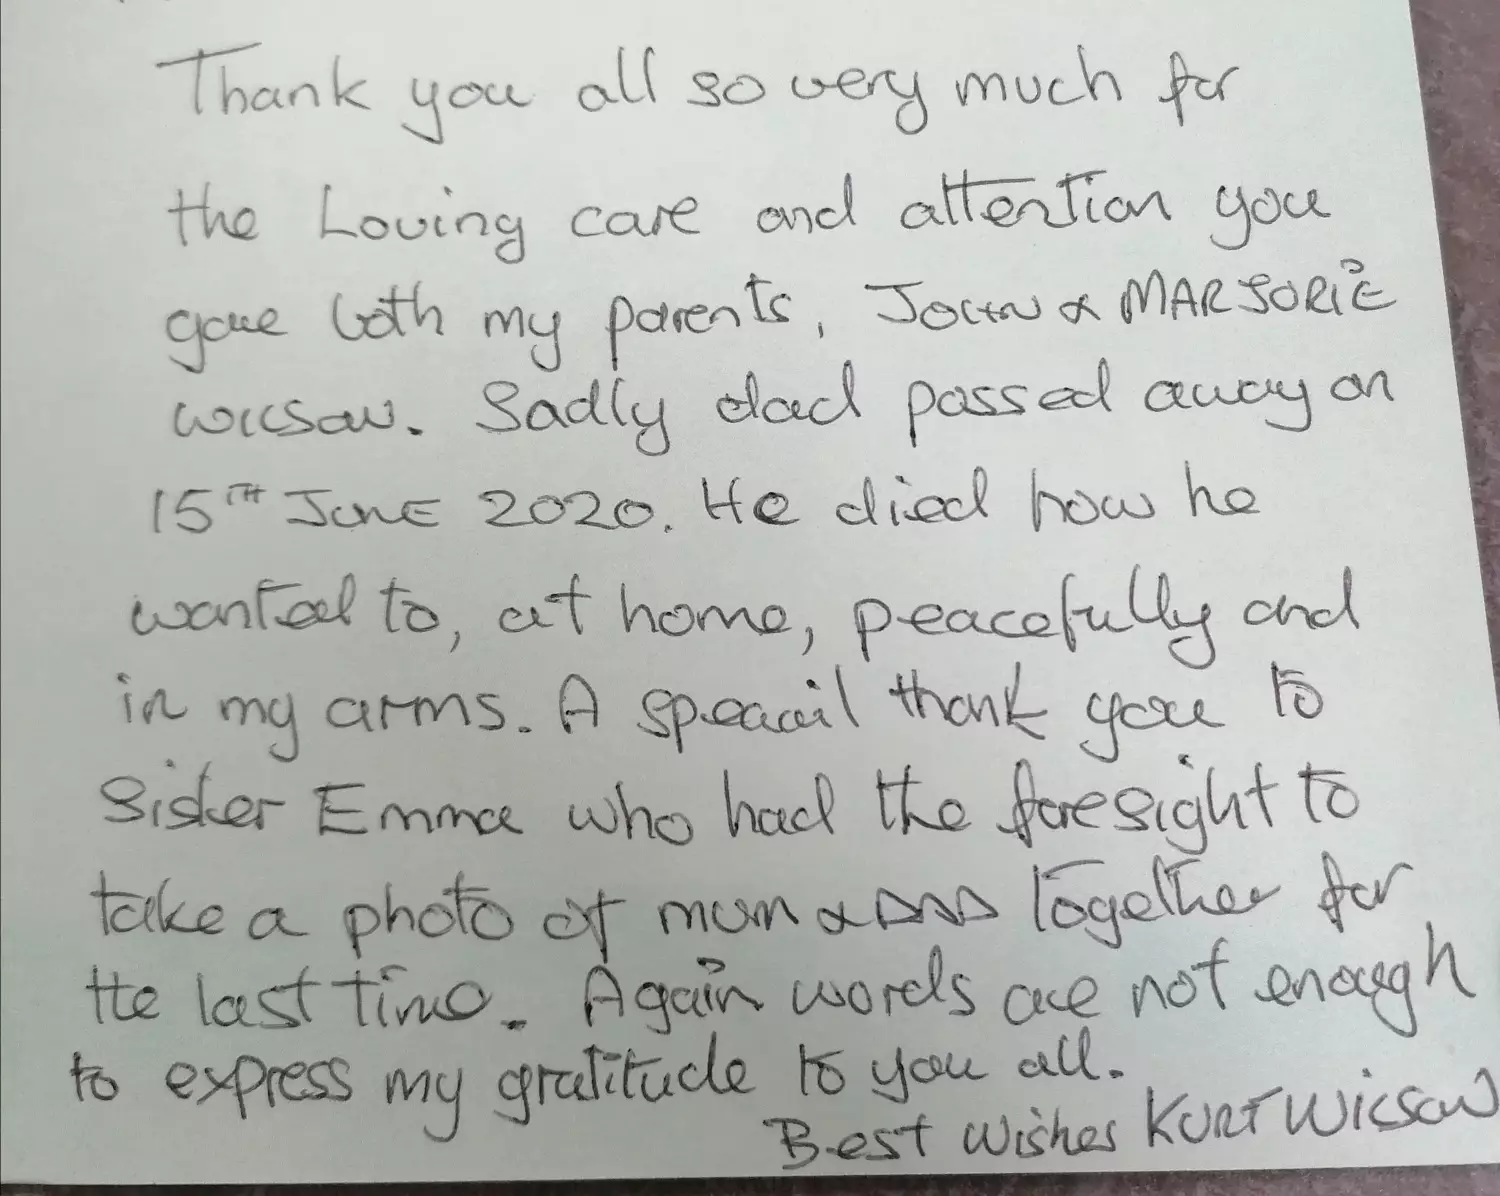 The couple's son sent in a note praising the staff.